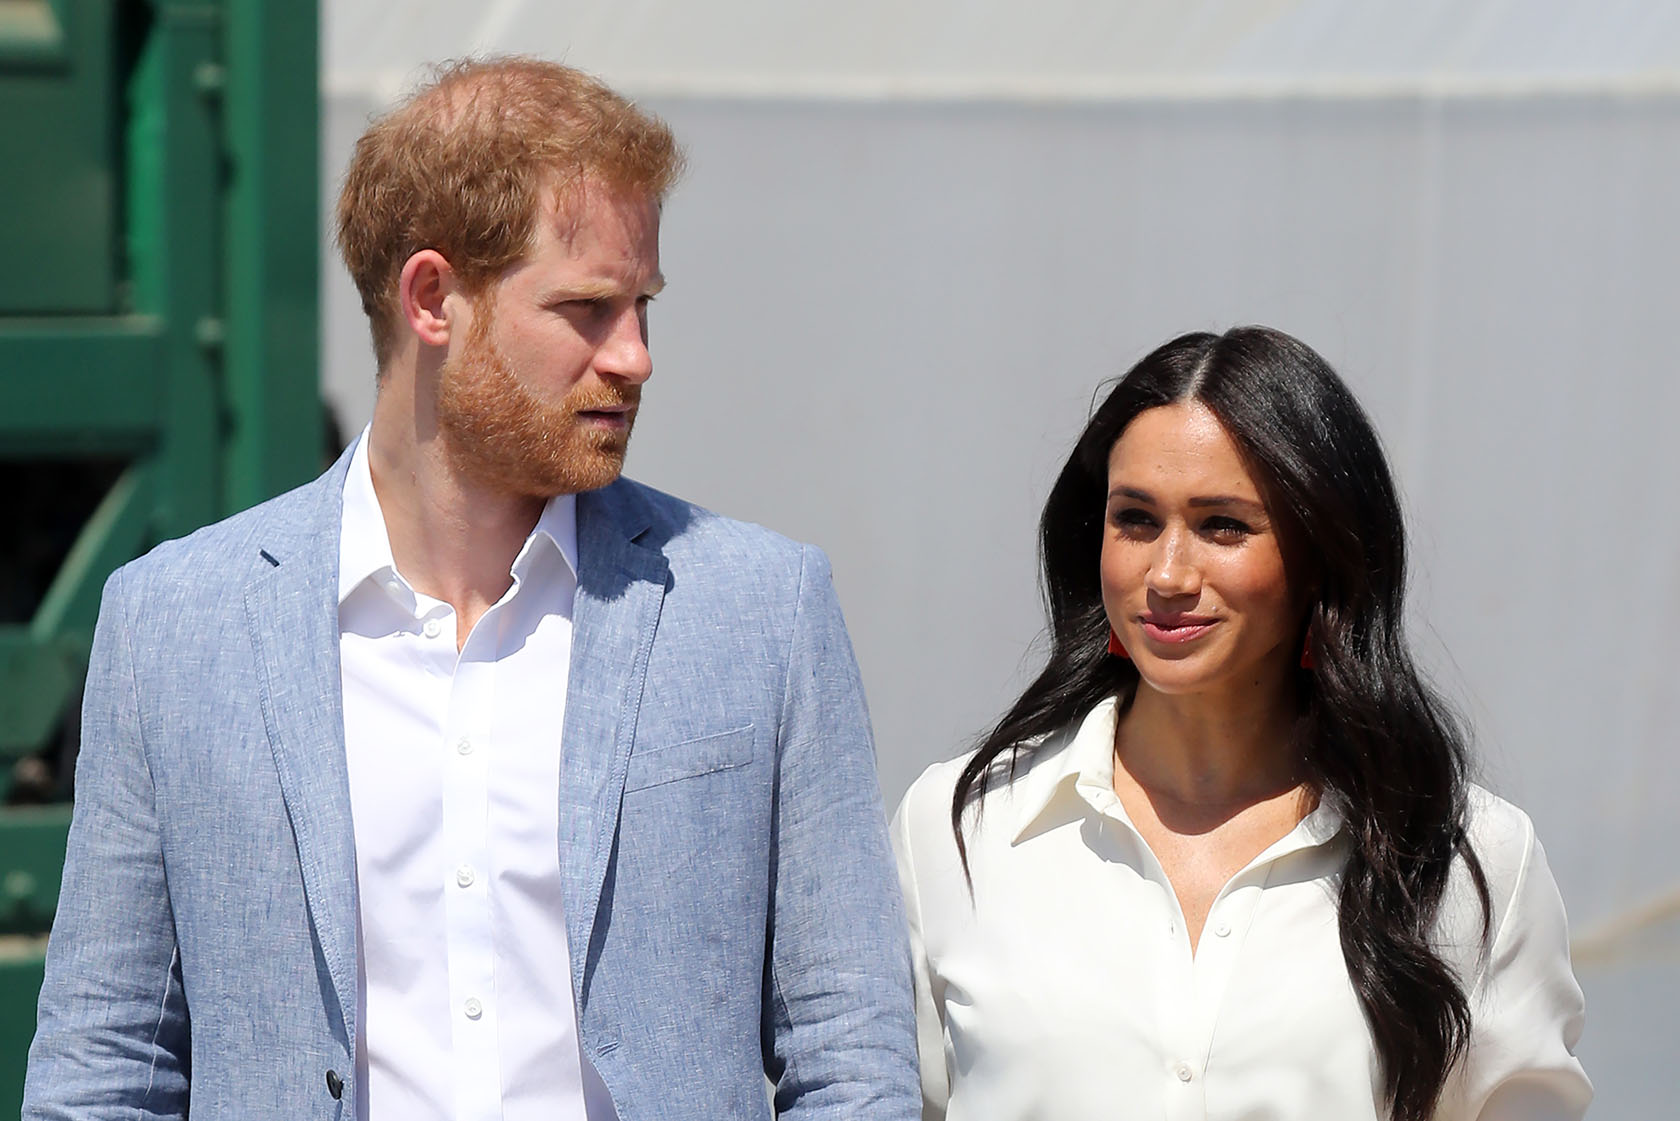 Prince Harry and Meghan Markle: is tabloid coverage gaslighting?